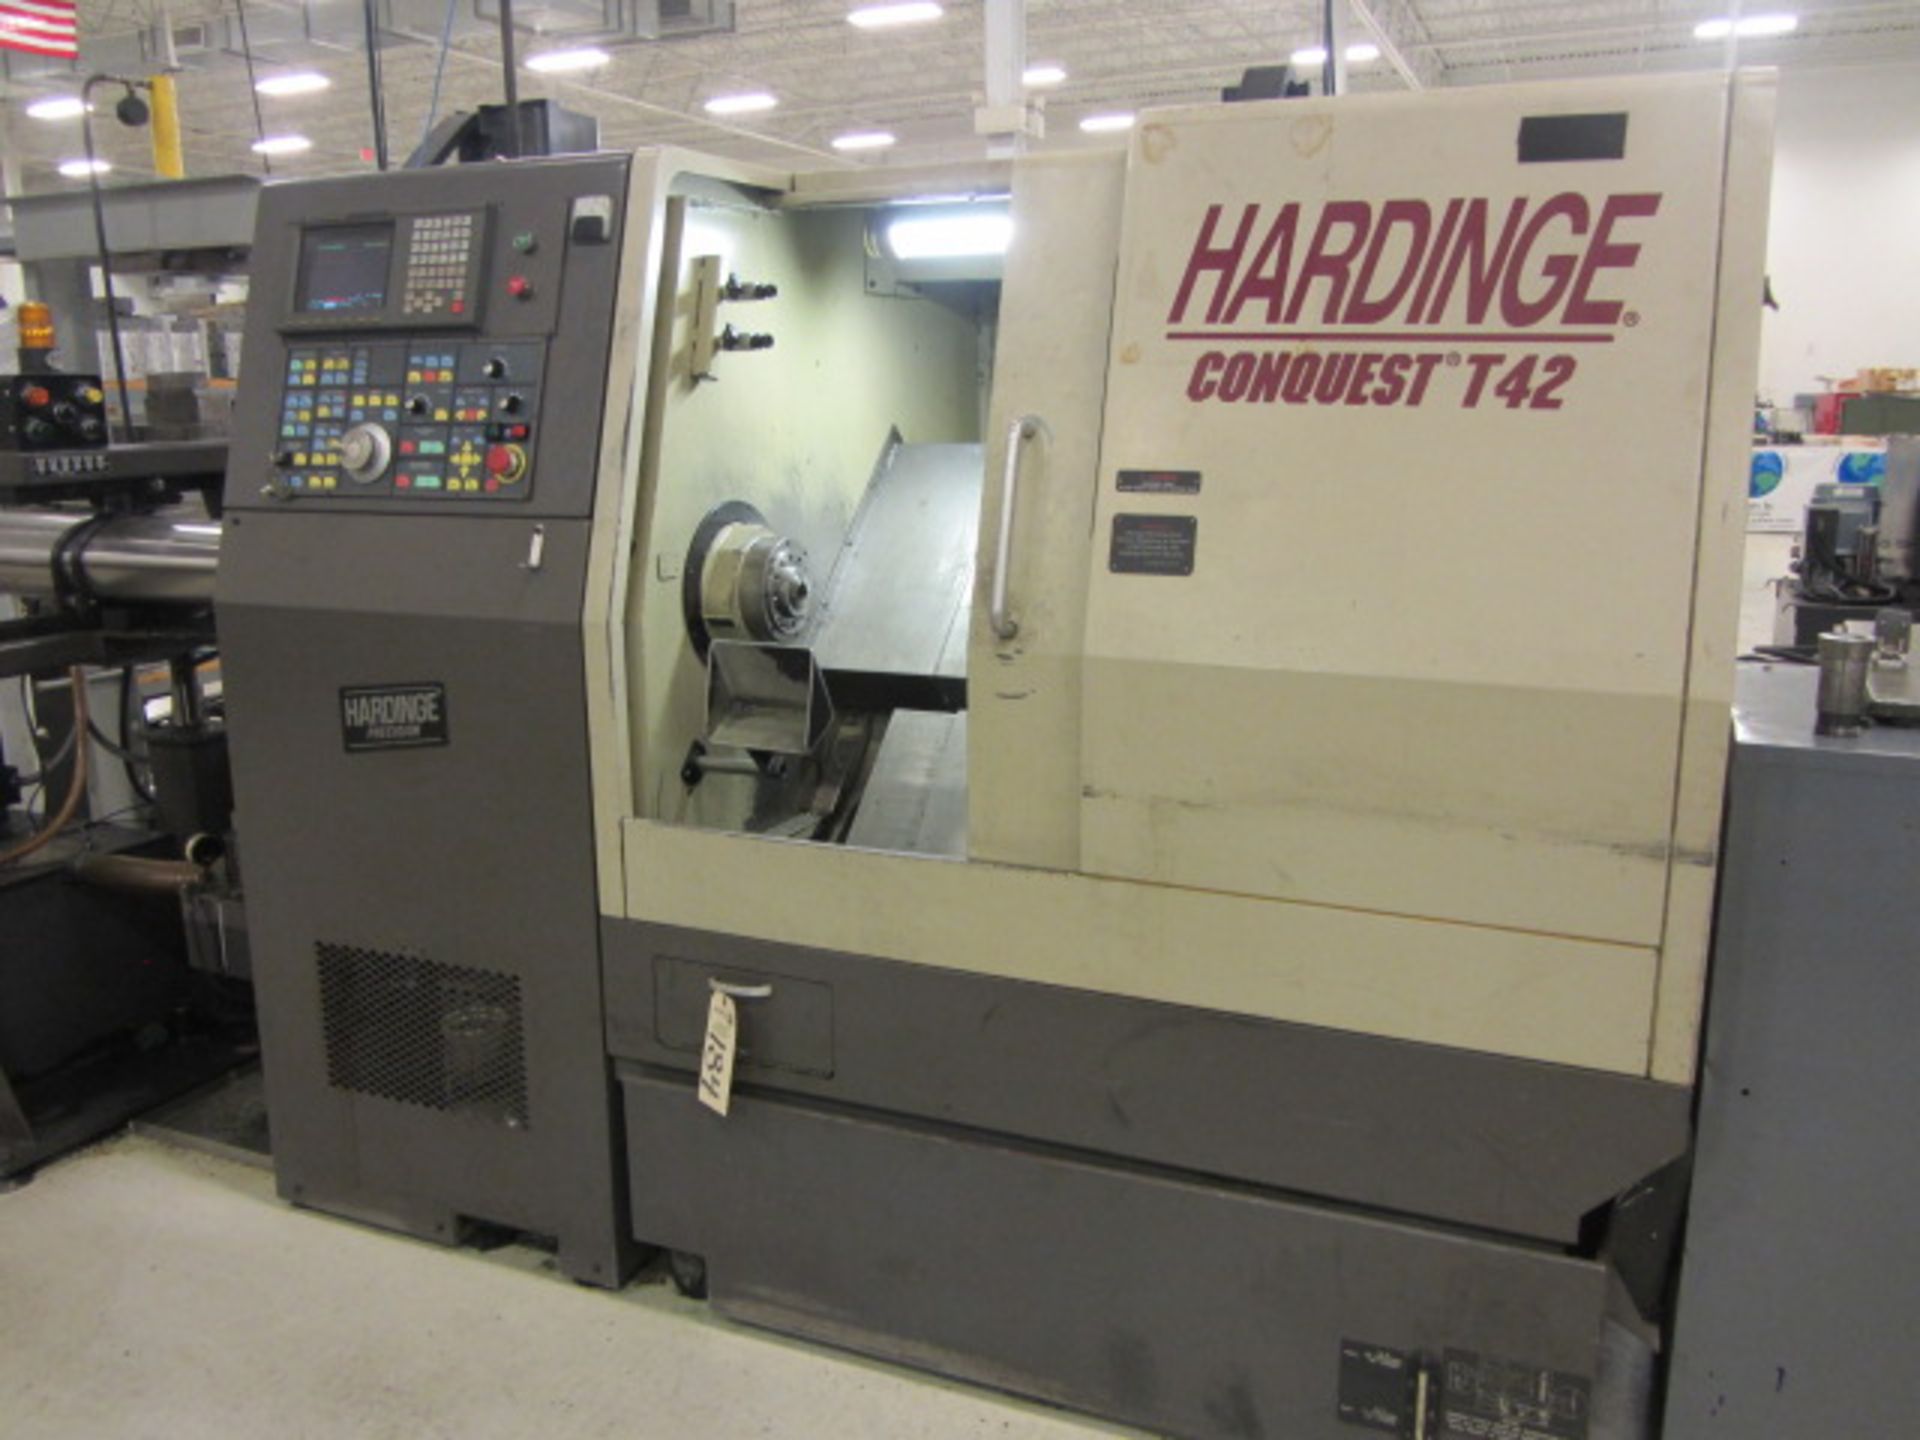 Hardinge Conquest T42 CNC Turning Center with 6'' Chuck, Collet Spindle Nose, Spindle Speeds to 5000 - Bild 7 aus 9